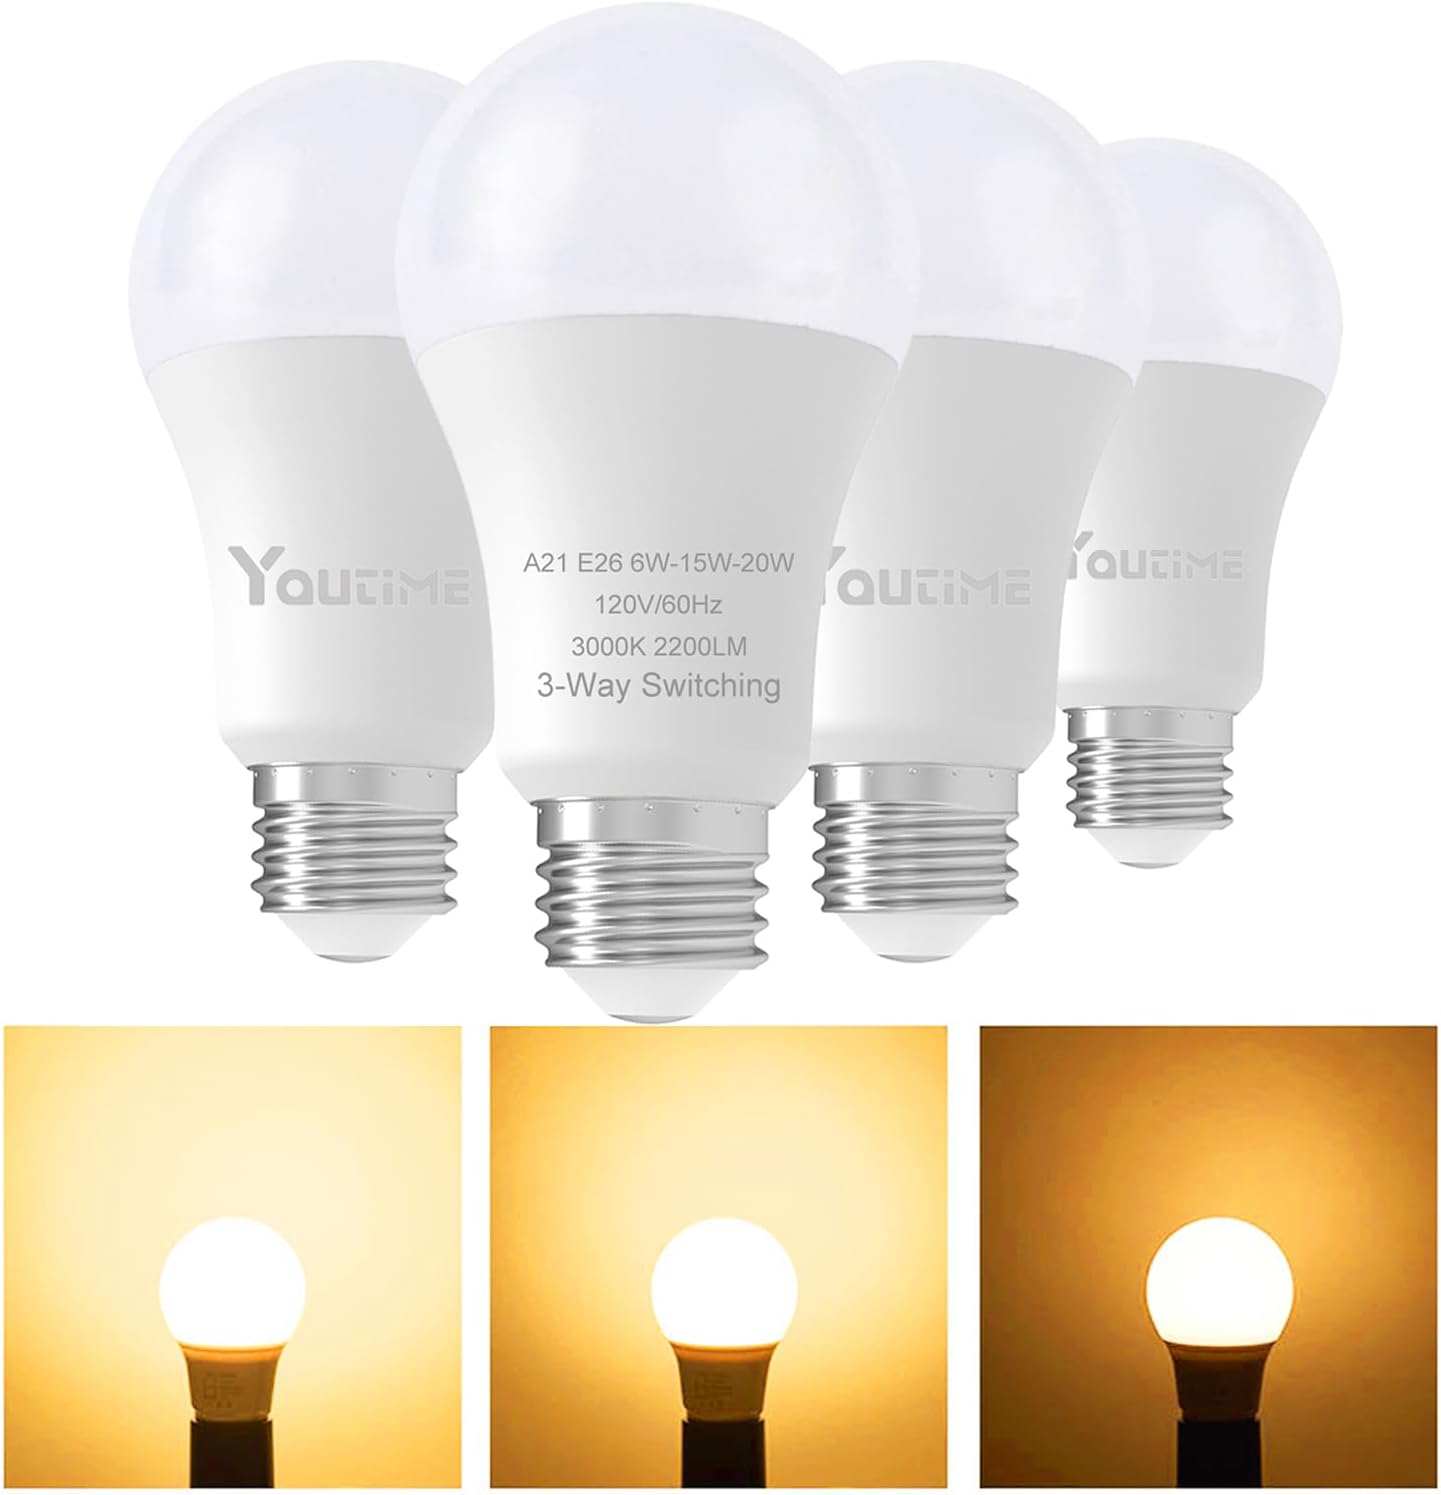 Youtime 3 Way Light Bulb Review